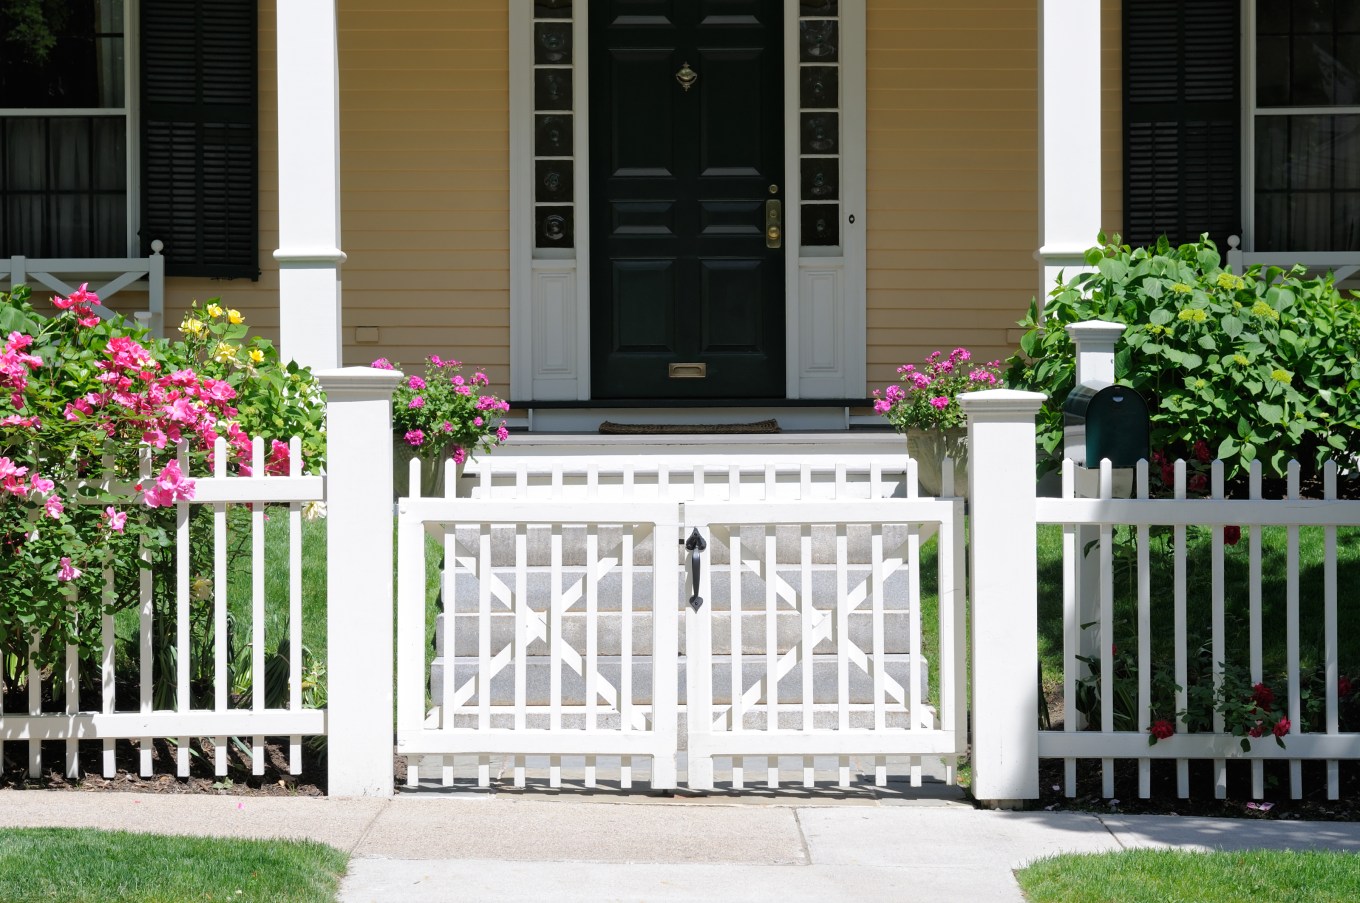 Small white gate and picket fence with roses in front of a porch creates curb appeal